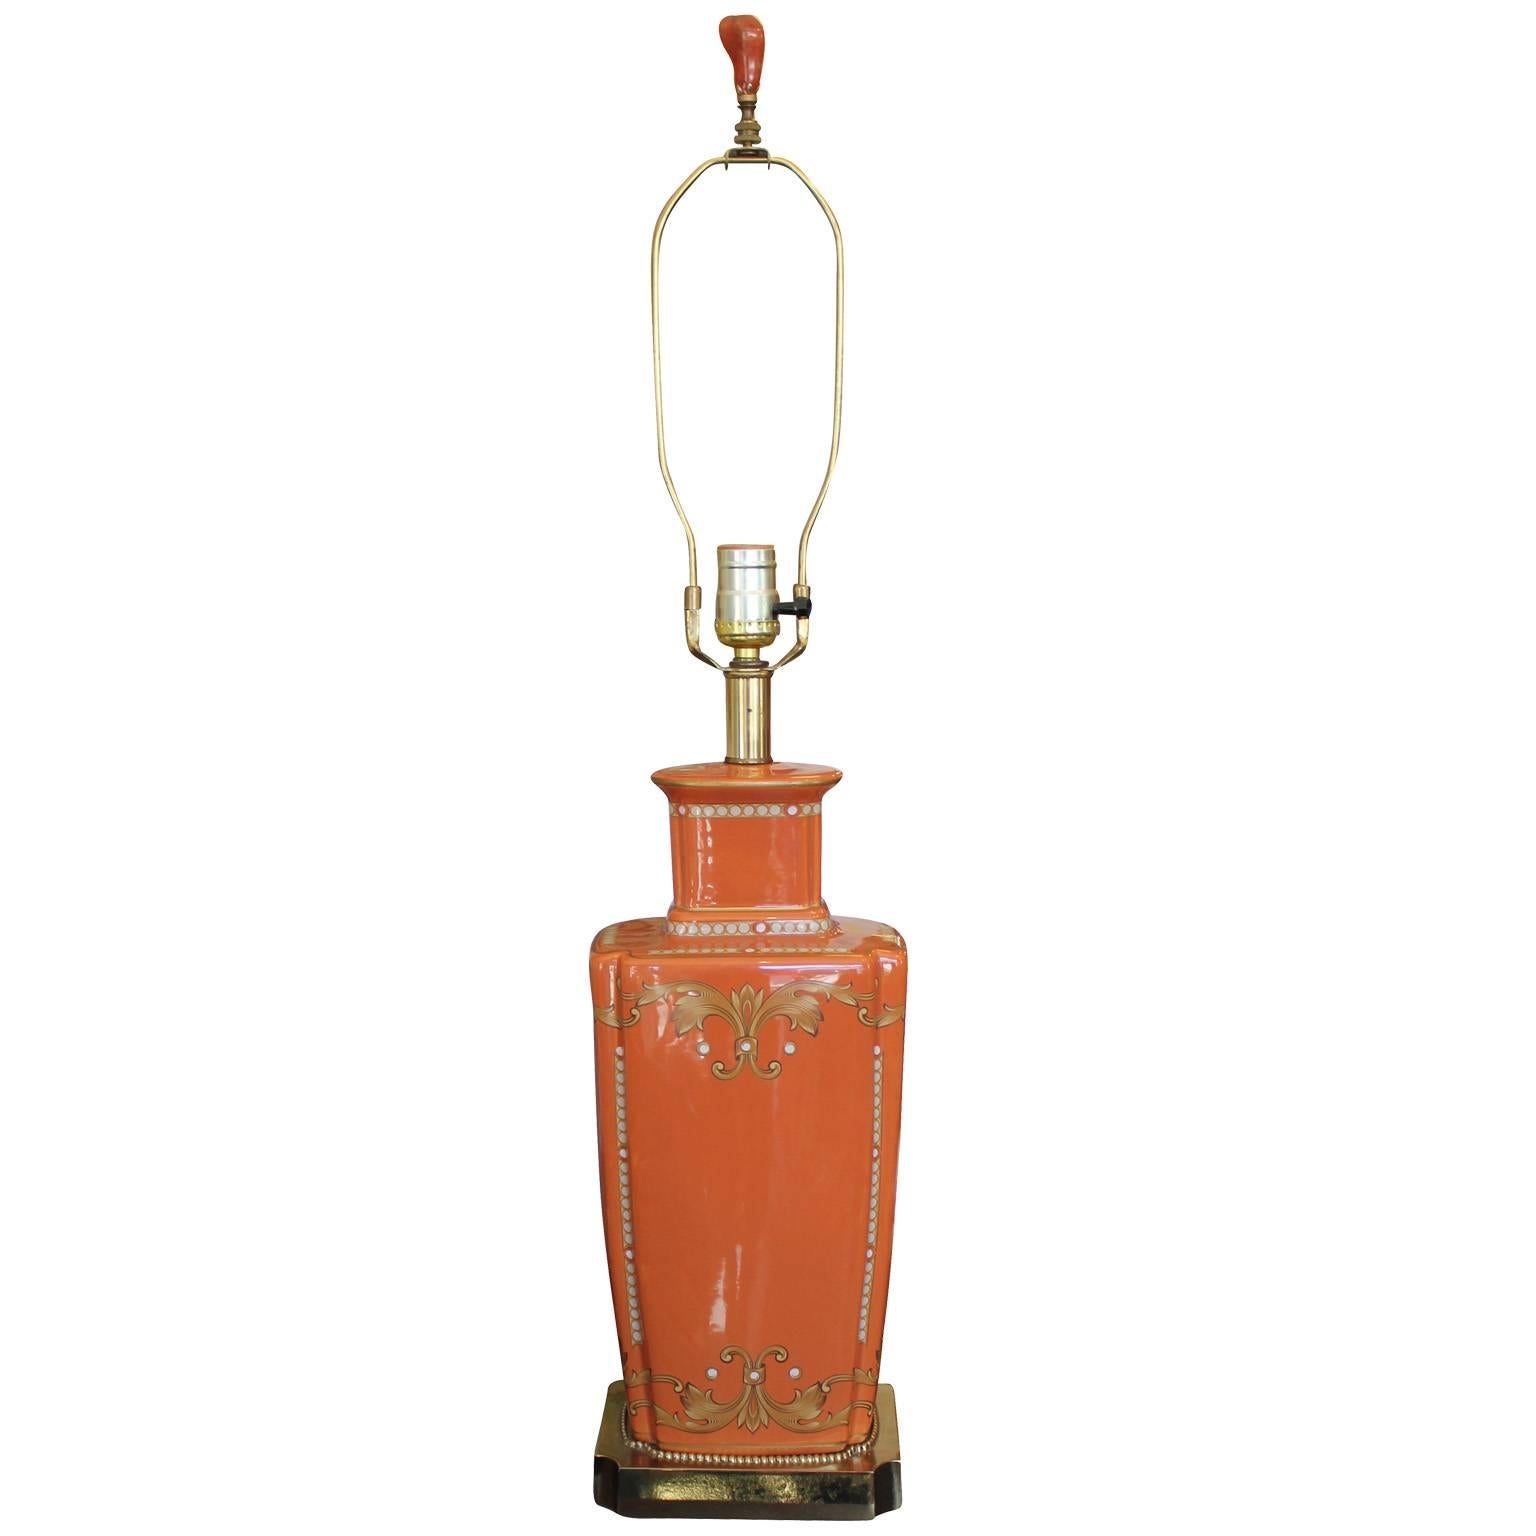 Glamorous pair of orange ceramic table lamps. Urn shaped lamps feature hand-painted scrollwork motifs. Shiny brass bases. Organic Amber stone finials complete the lamps.